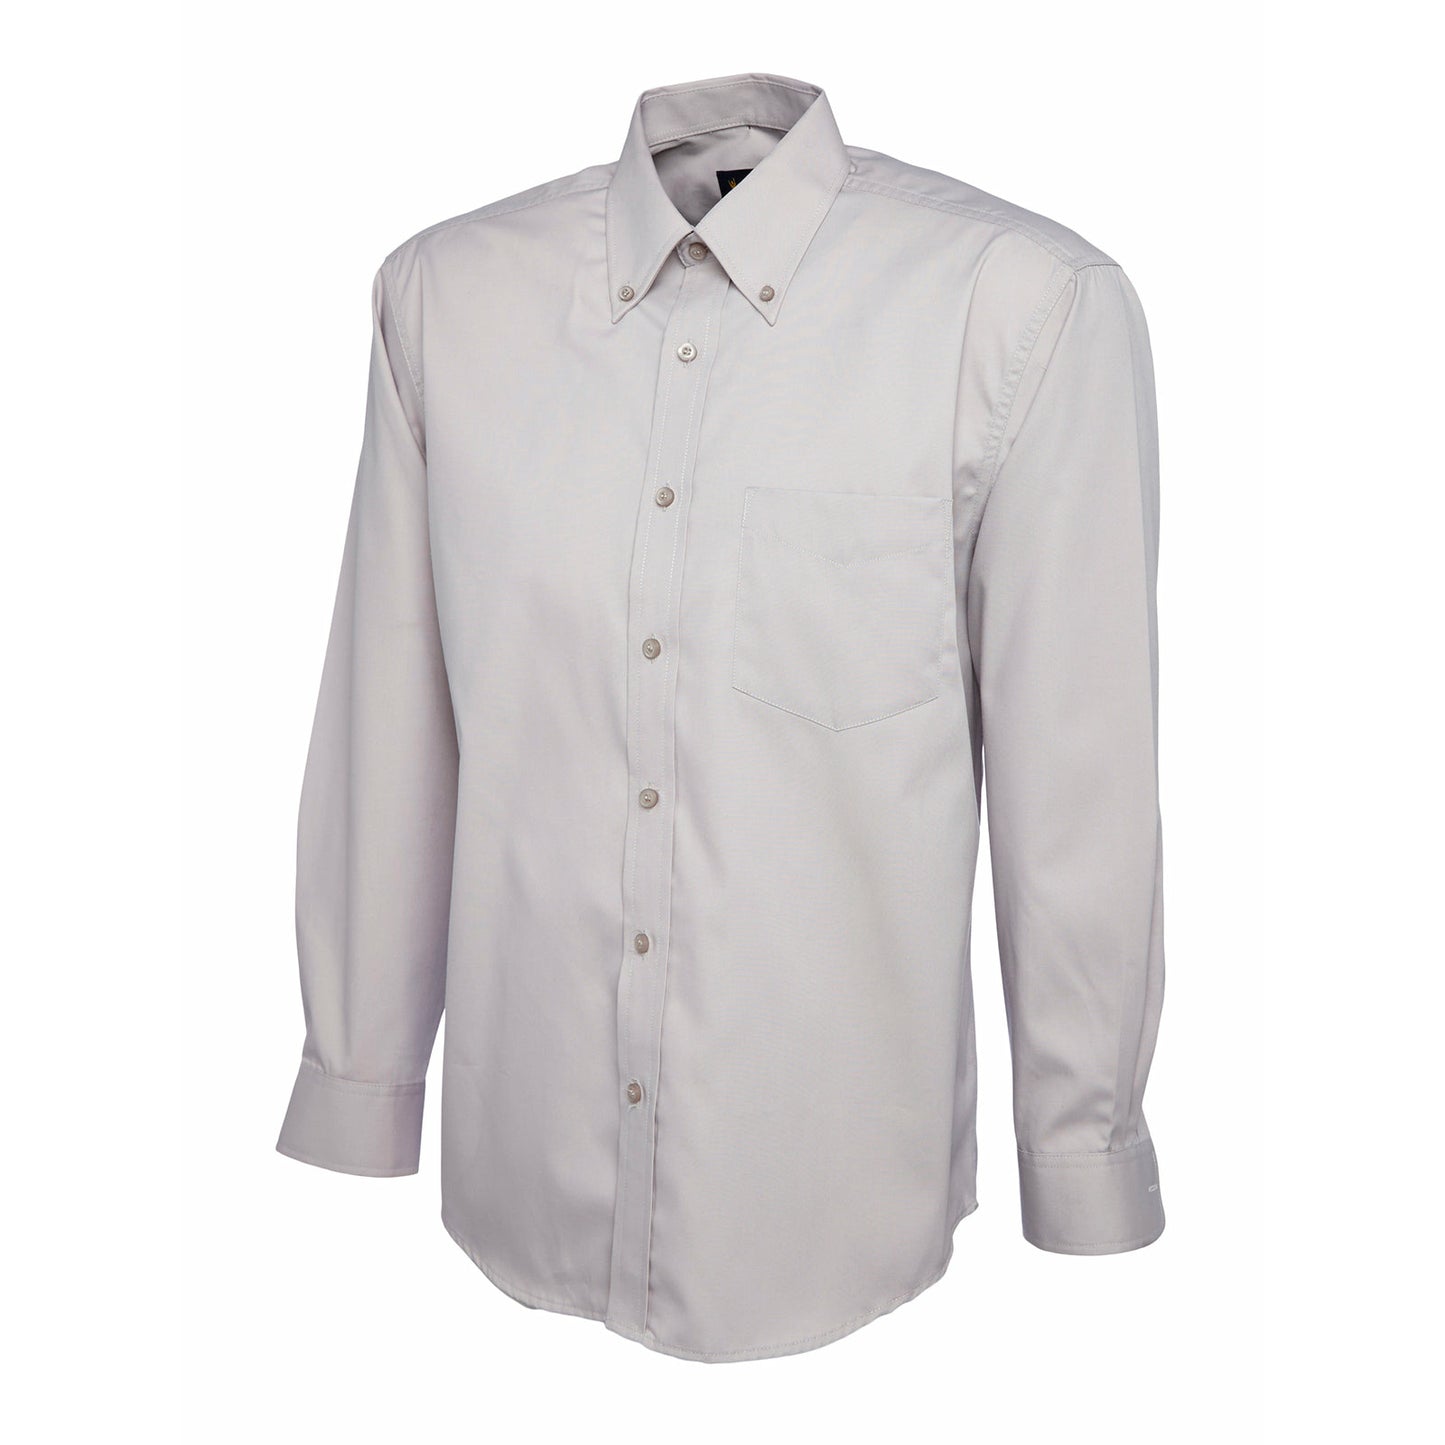 Mens Pinpoint Oxford Full Sleeve Shirt - Solid Grey